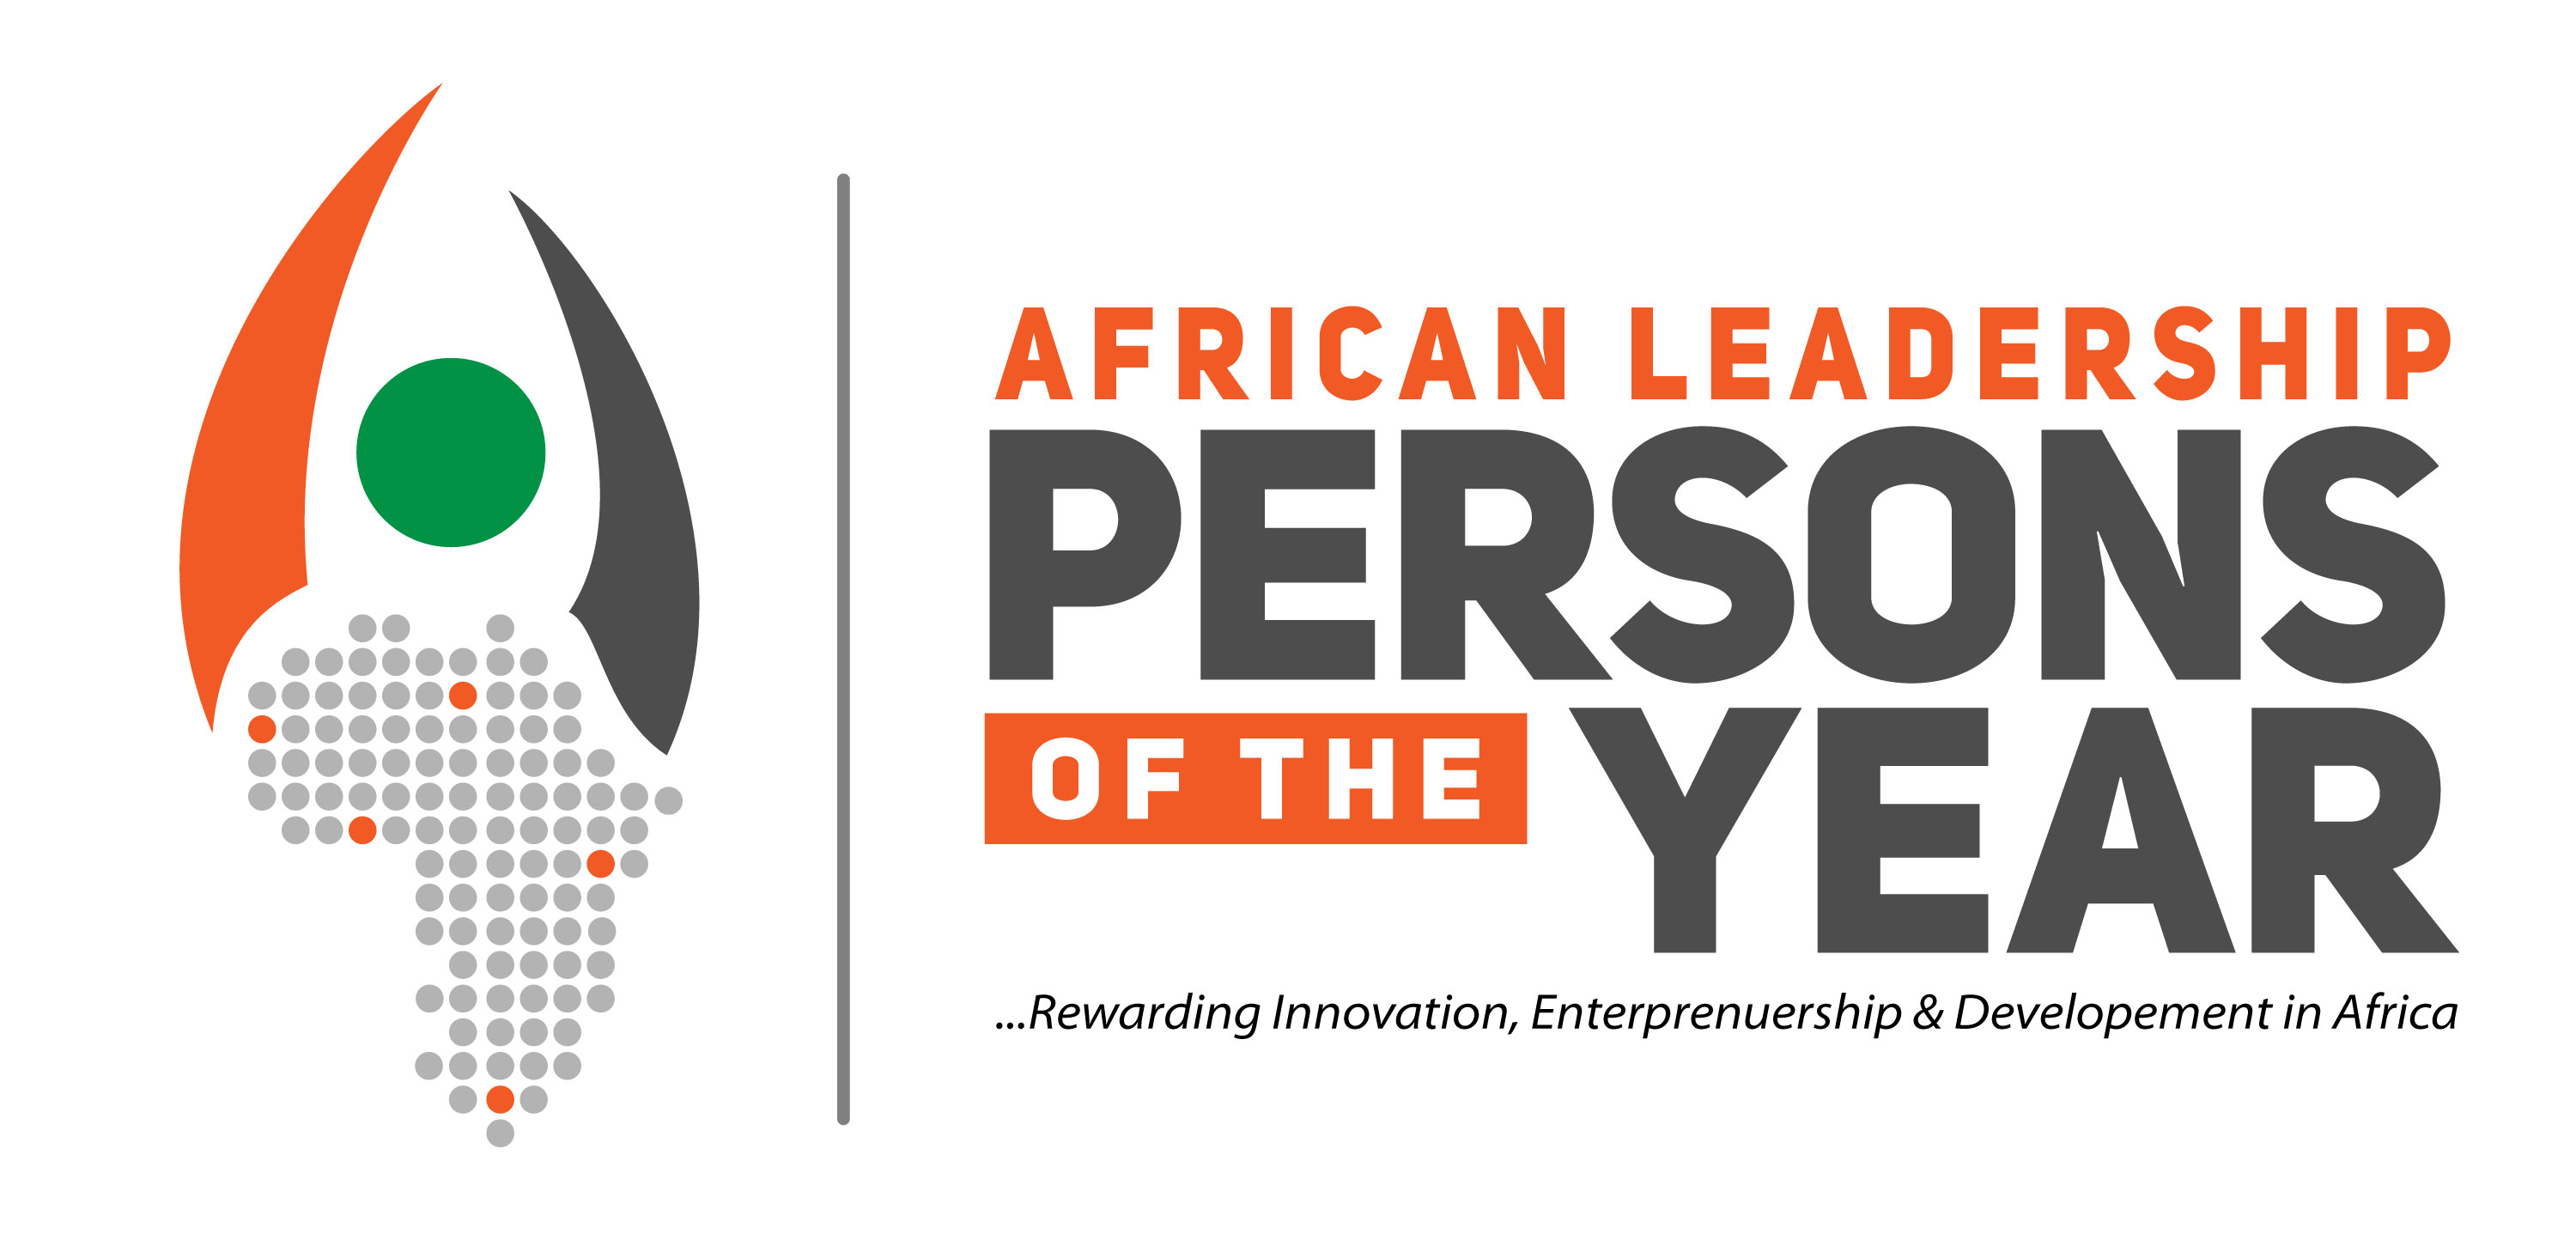 Nomination Opens For African Leadership Magazine Persons Of The Year 2021